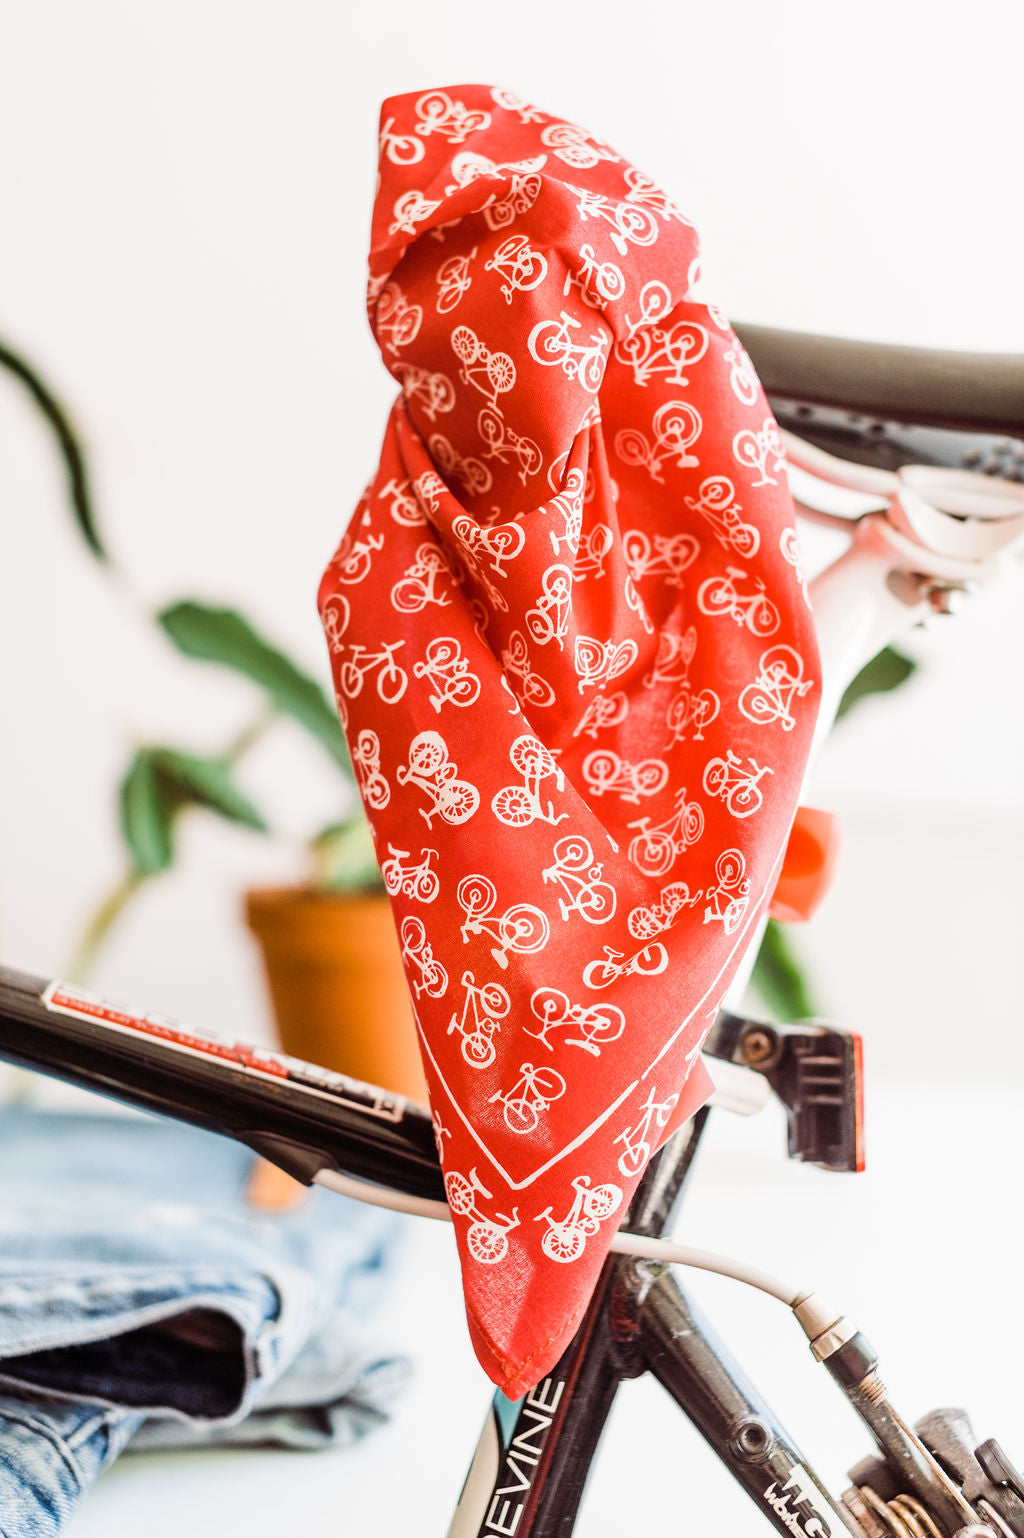 Red bandana with white bicycles design by Hemlock Goods | you can shop now at  shop.rambleandcompany.com or visit our storefront in downtown Wichita Falls, Texas || small batch + hand printed tees | home goods | paper goods | gifts + more